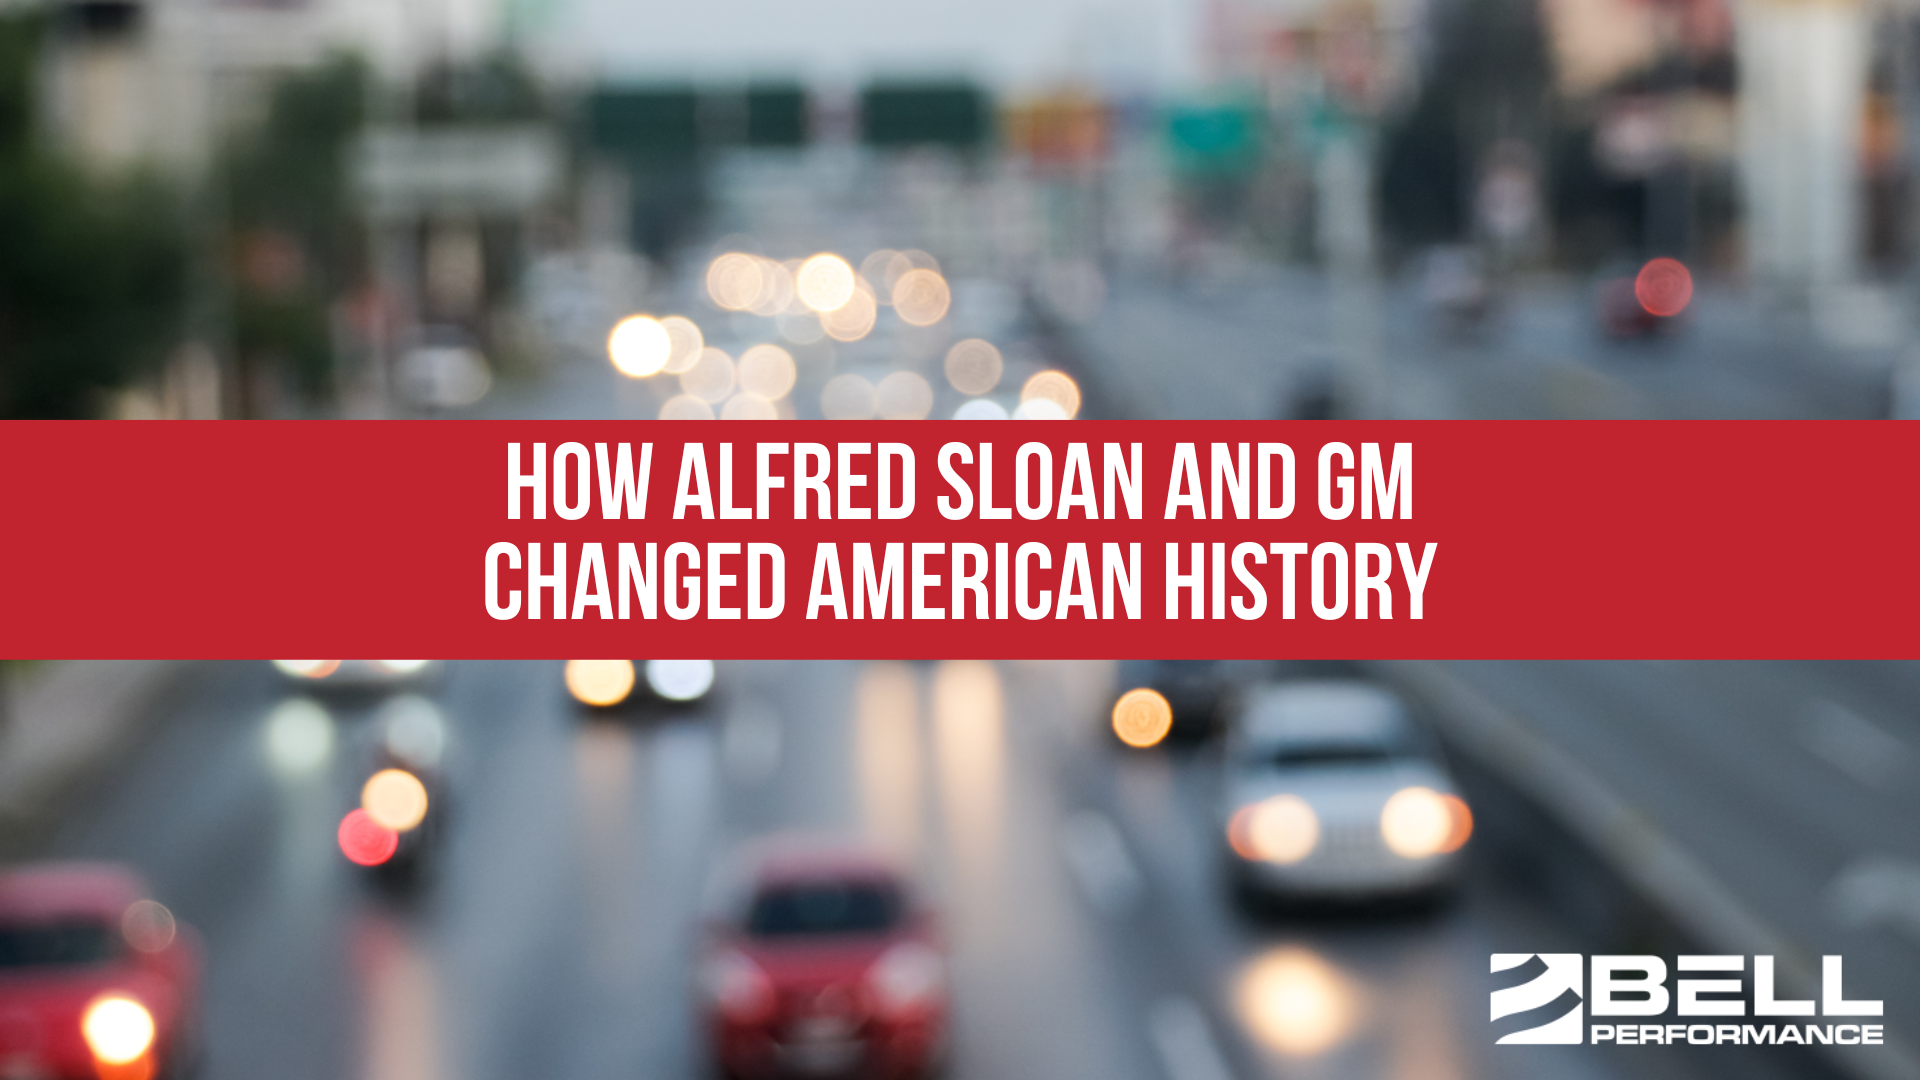 How Alfred Sloan and GM changed American history